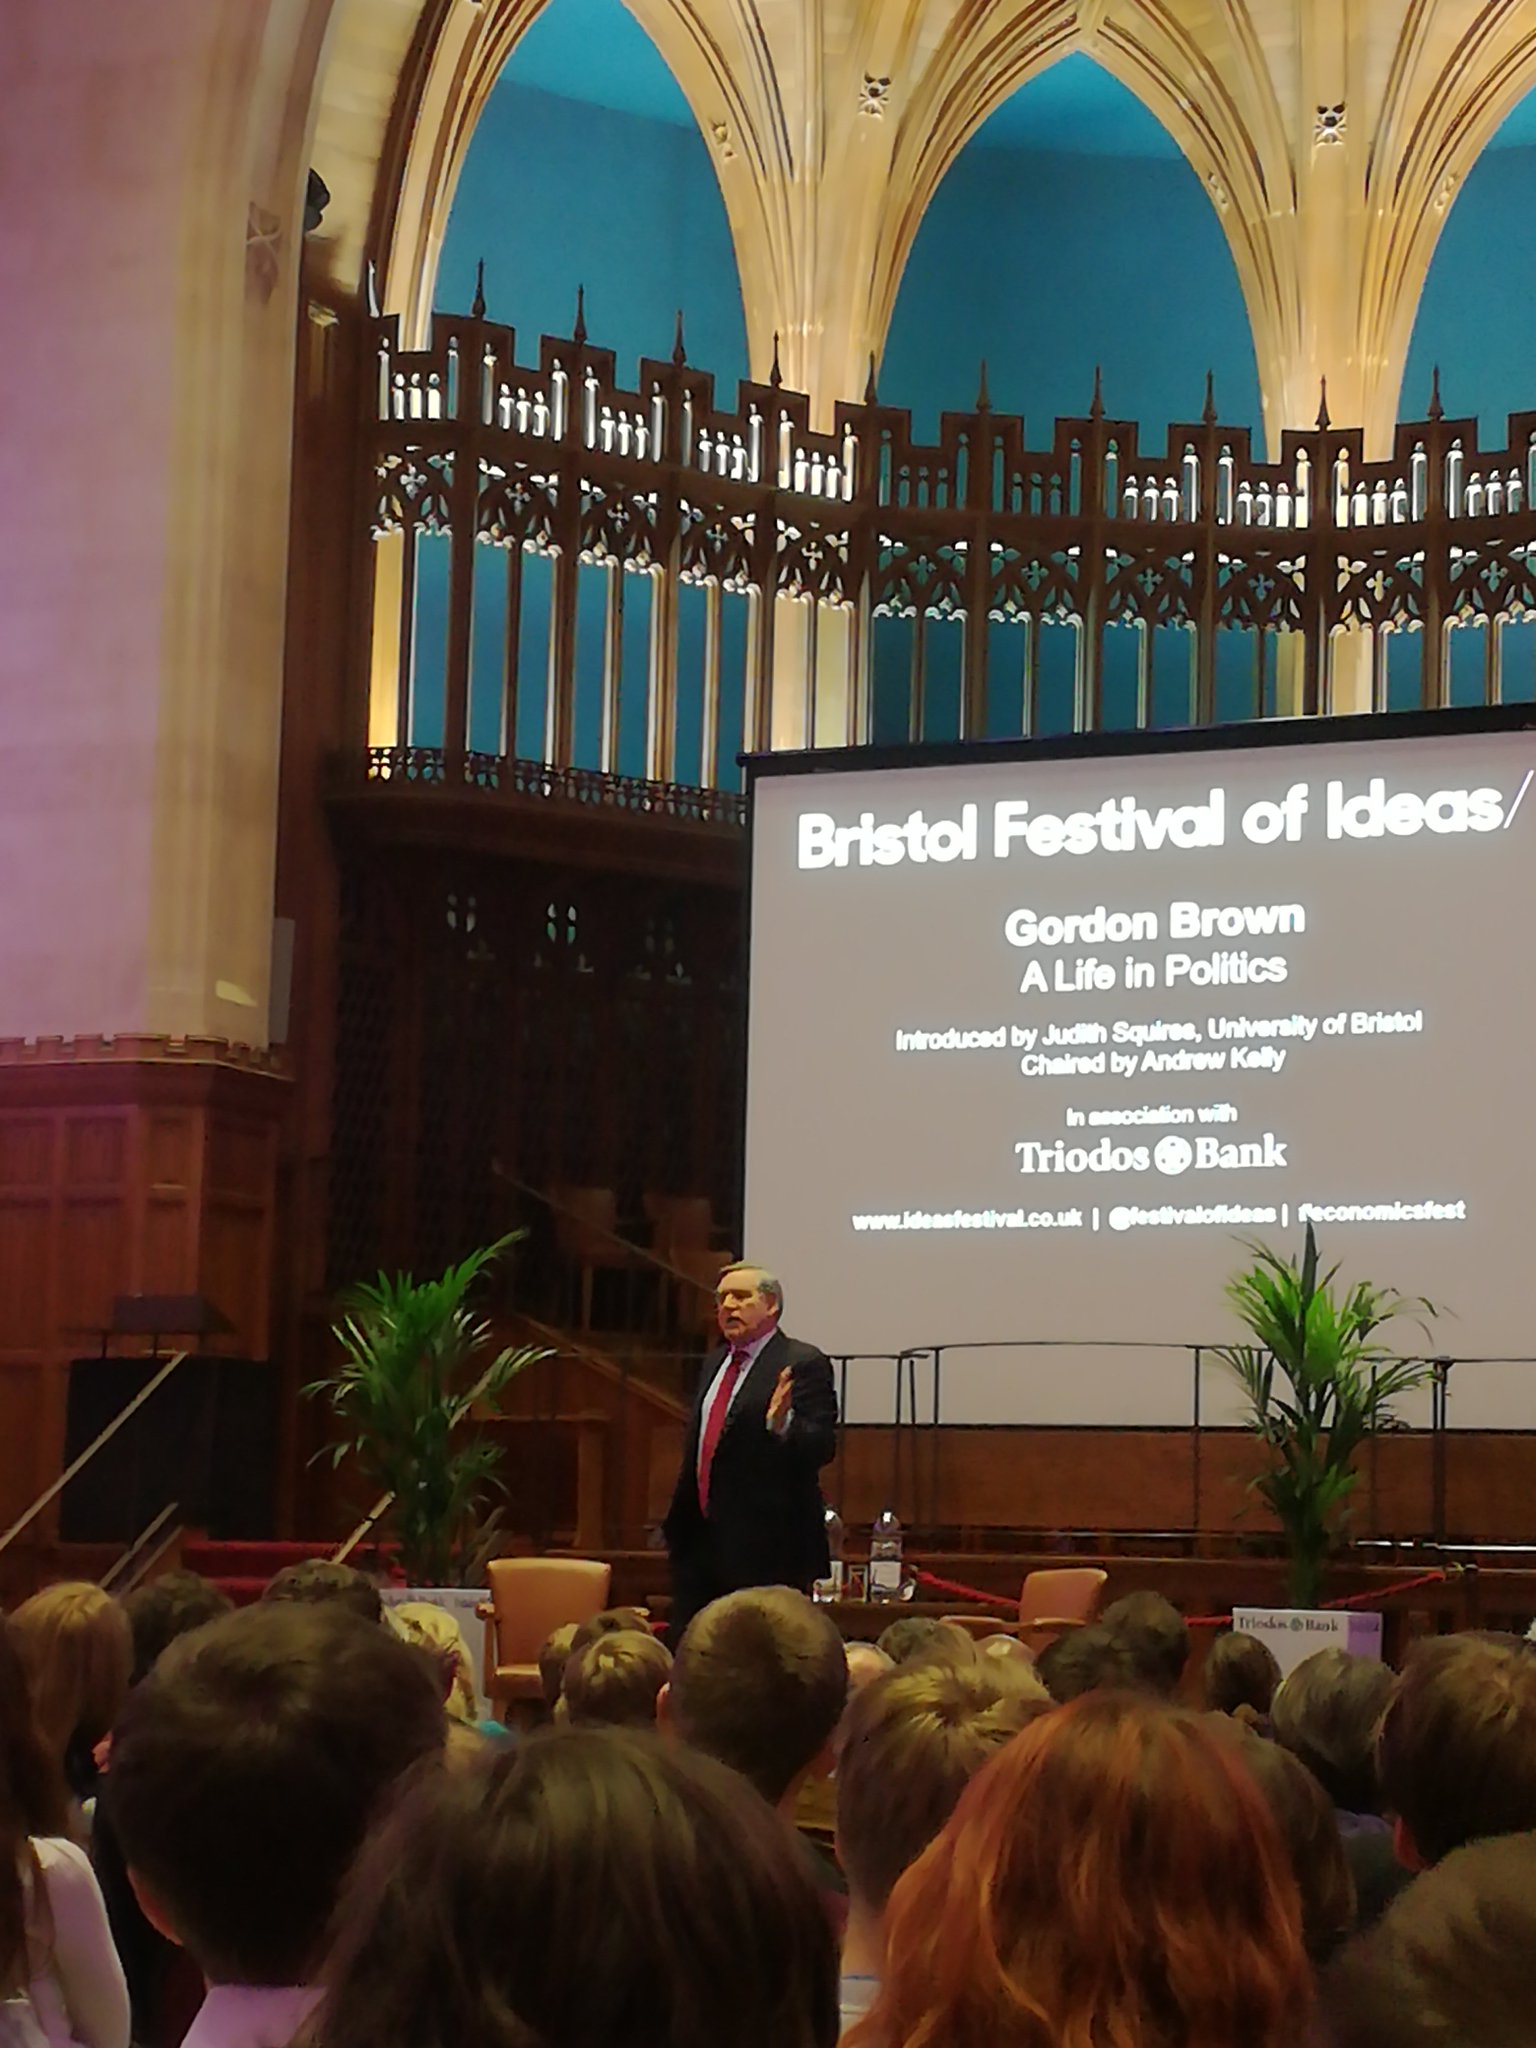 So wonderful to hear Gordon Brown in Bristol tonight, came across as warm, funny and passionate #economicsfest https://t.co/qGenNBzjLi